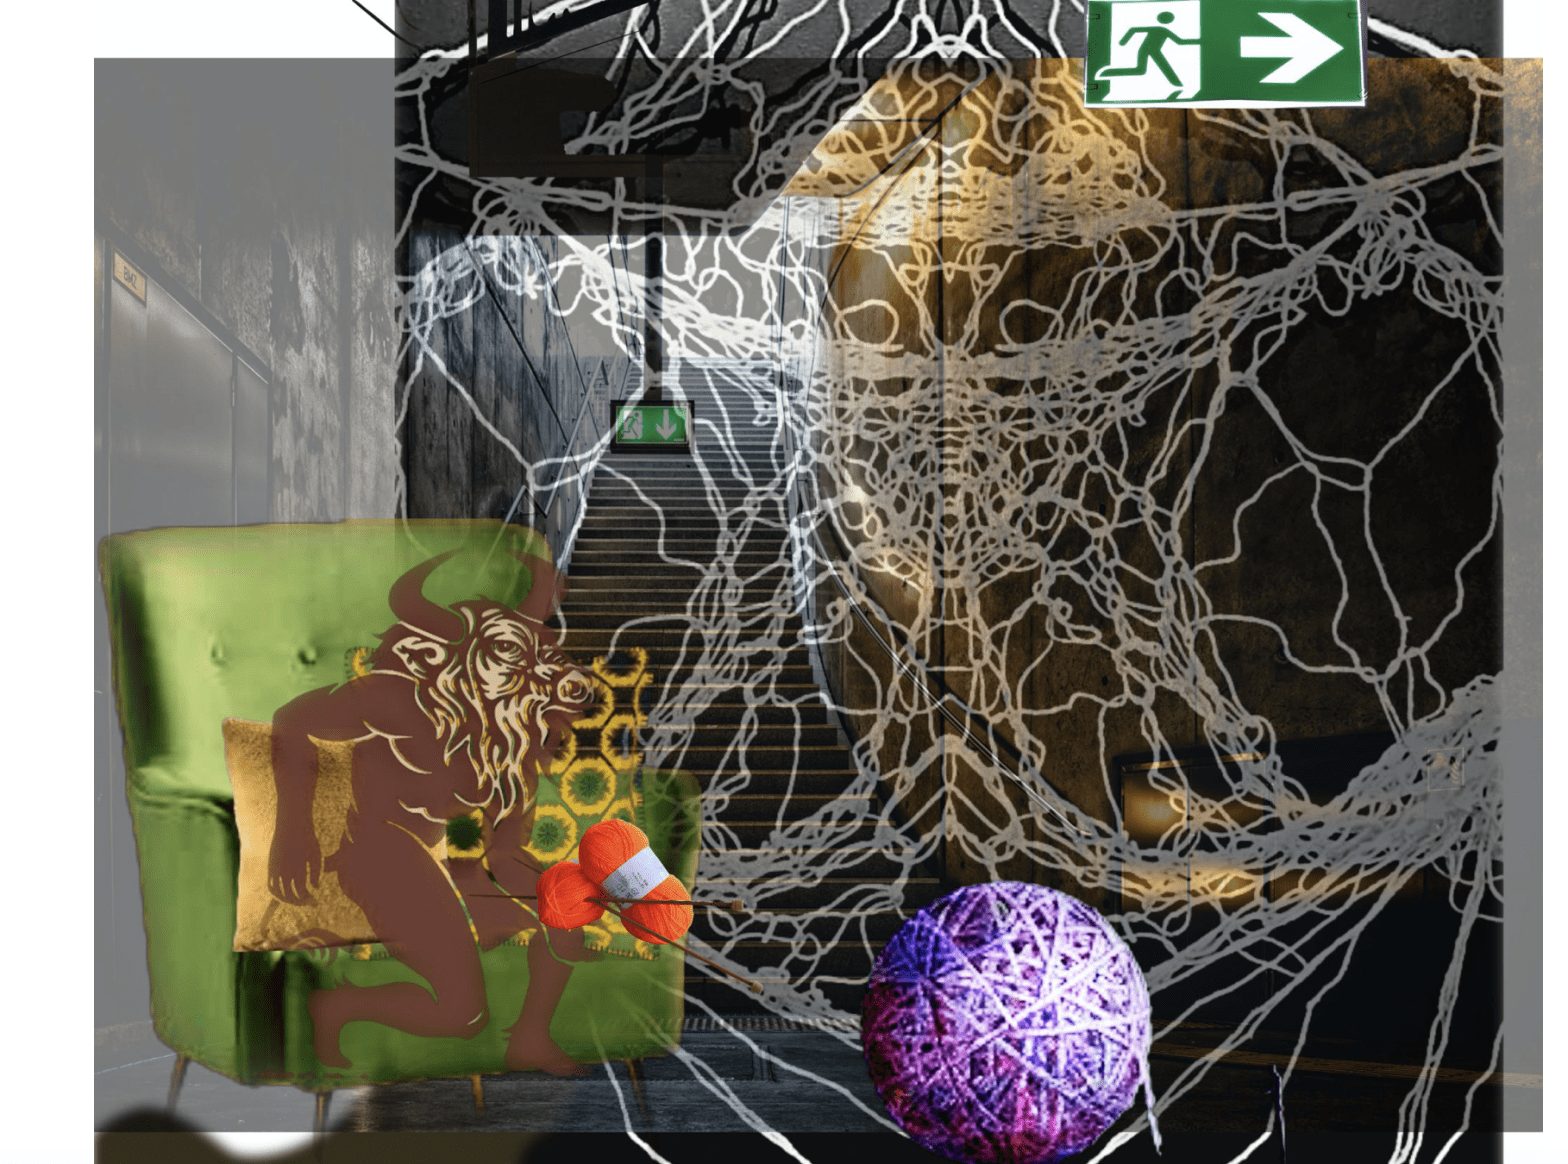 Layered collaged digital artworks featuring a cushioned green chair, a figure depicting a human with an Ox head, orange balls of wool and a large purple ball of yarn. There is an illustrative photograph of symmetrical wool double exposed over a photograph of stairs with an exit sign.